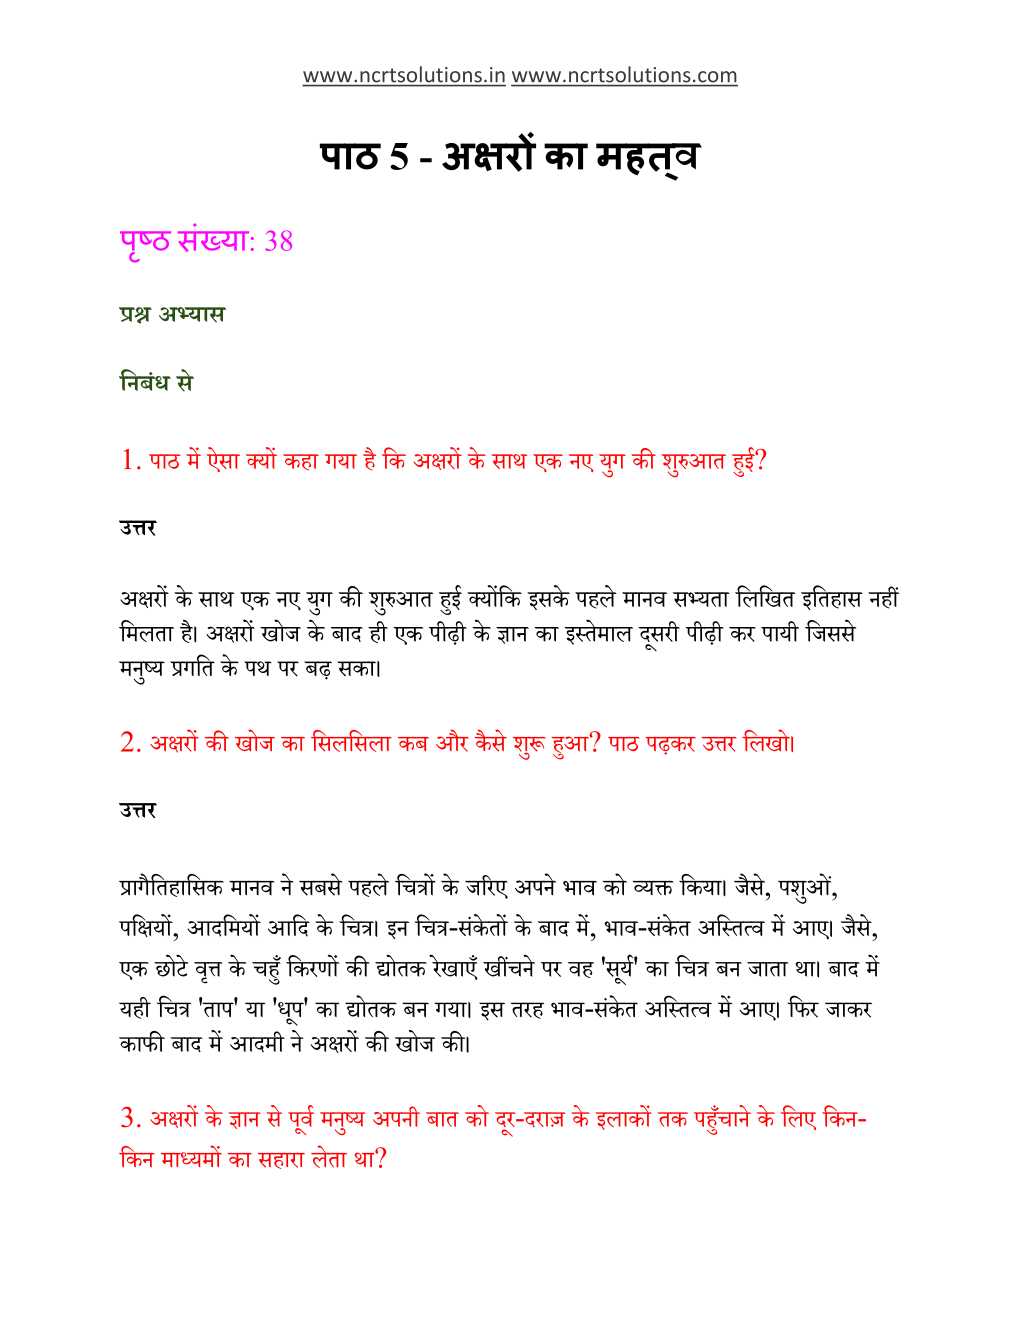 NCERT Solutions For Class 6 Hindi Vasant Chapter 5